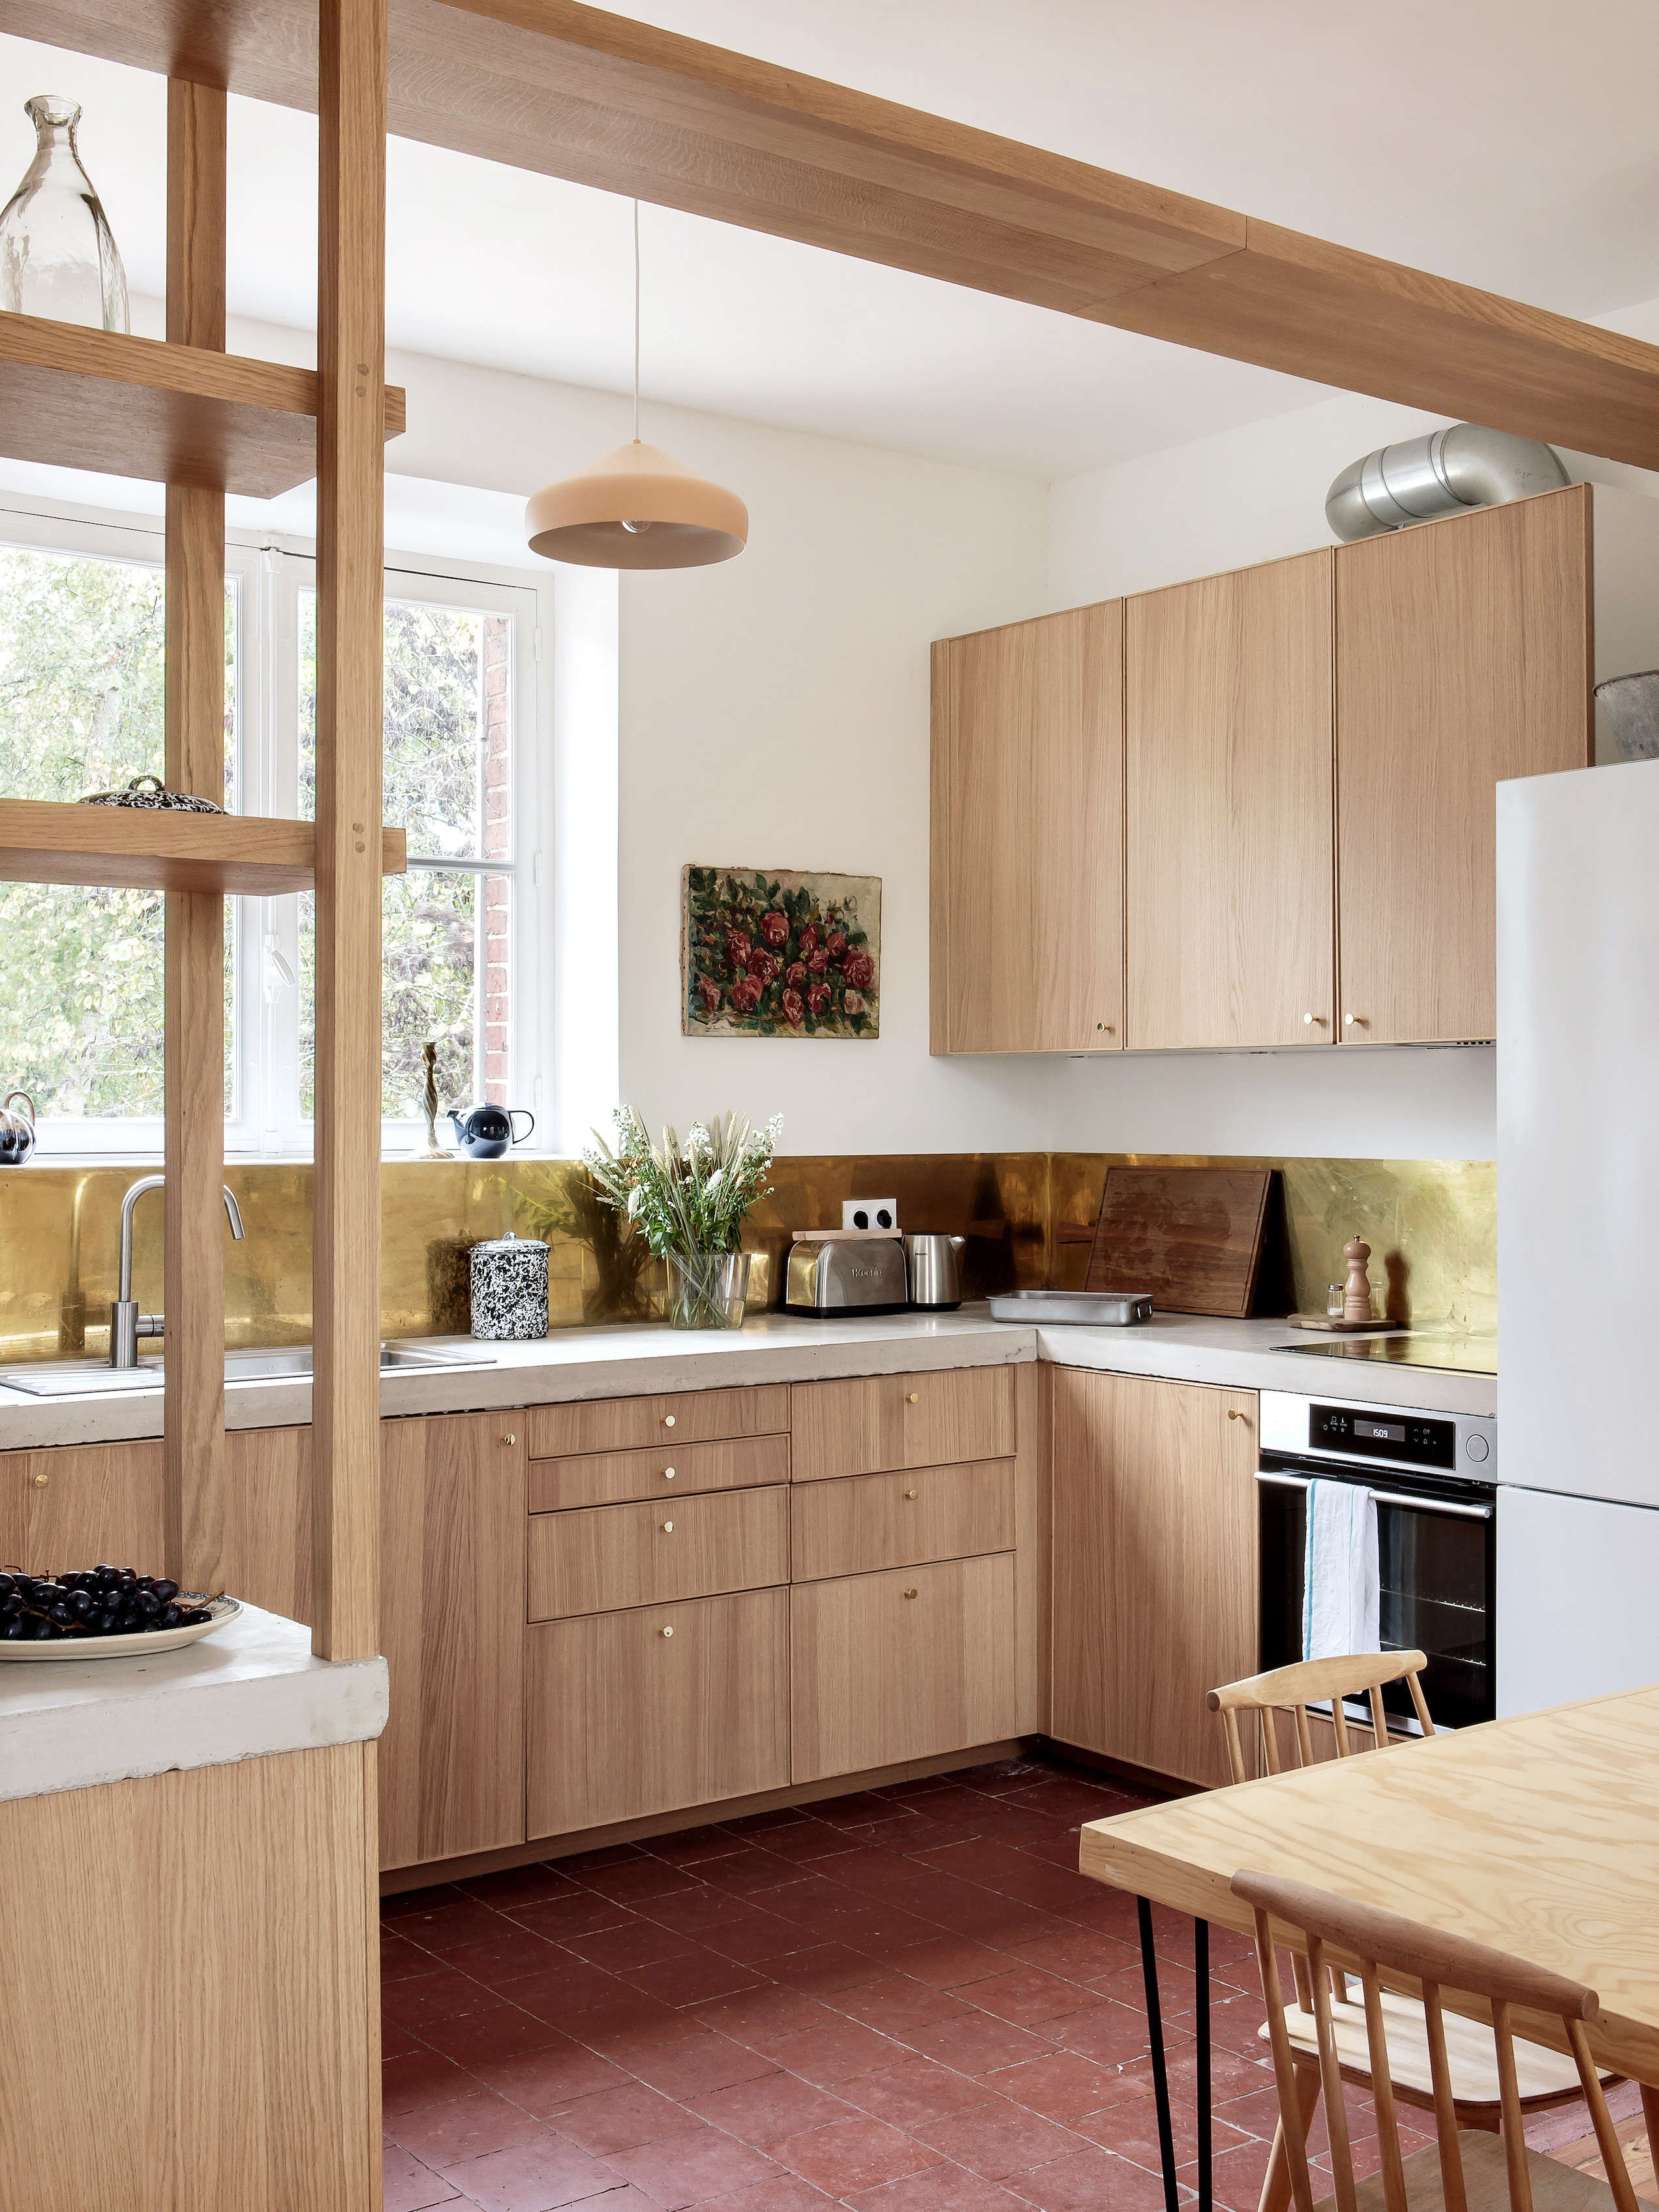 In Praise Of Ikea 20 Ikea Kitchens From The Remodelista Archives Remodelista